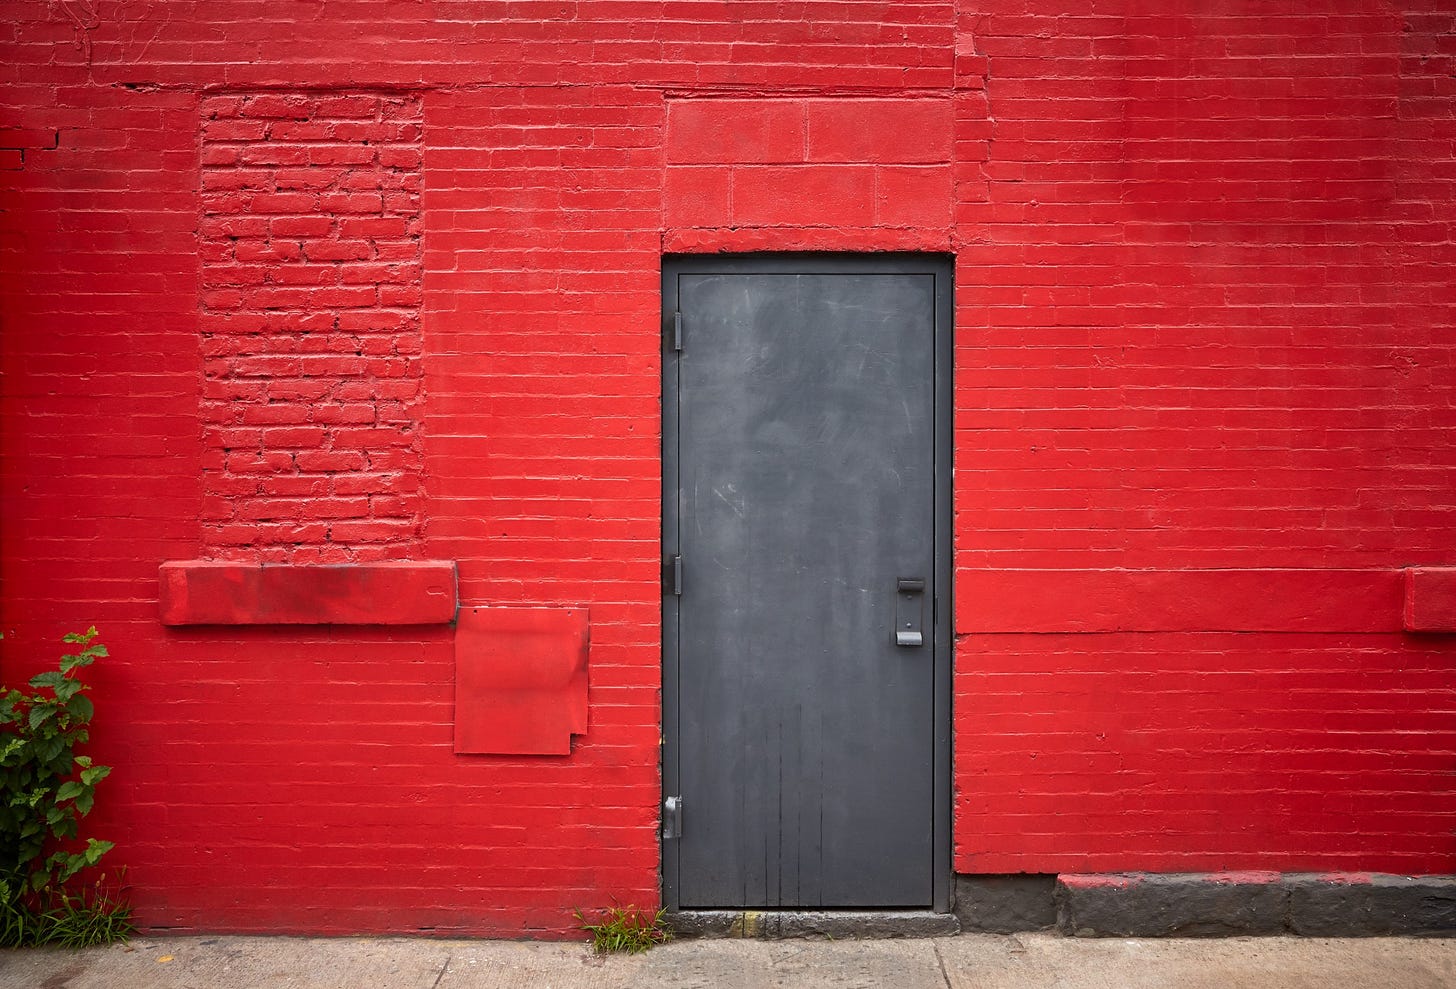 A dark door stands closed in a bright red brick wall.